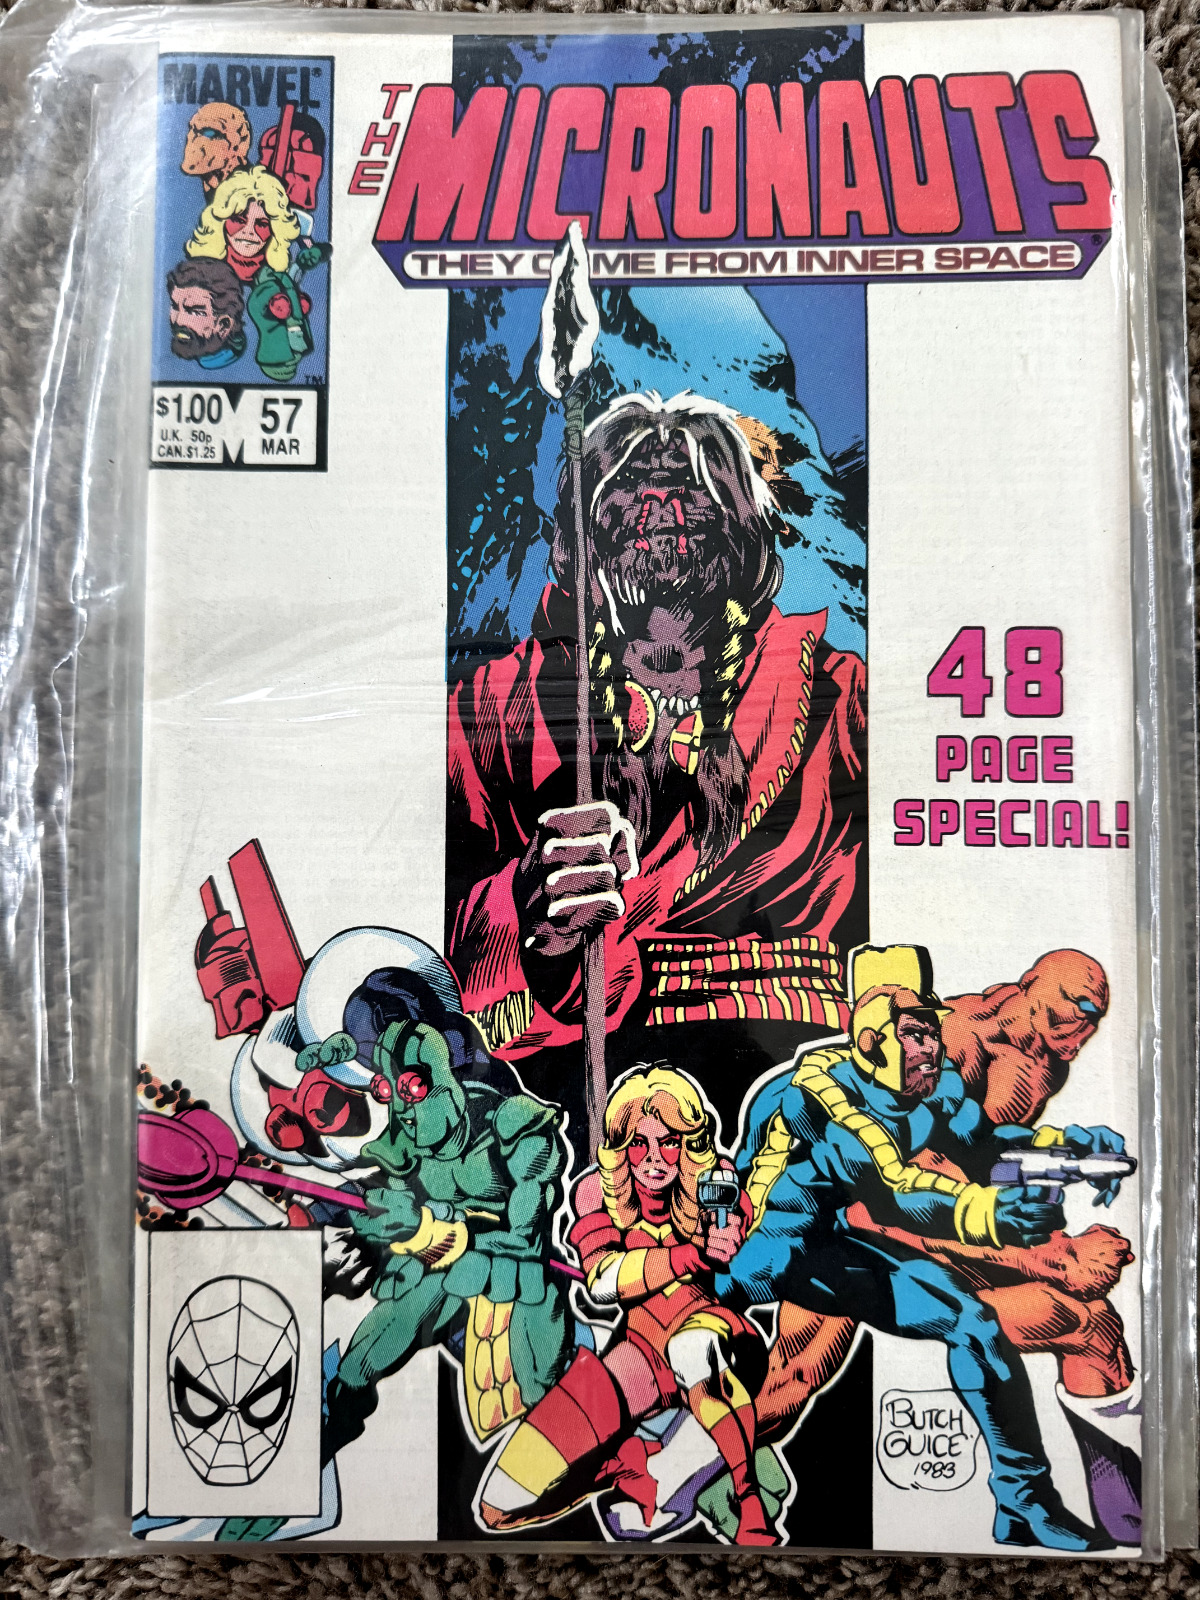 Micronauts Comic Lot - They Came From Inner Space #\'s 27,28,33,44,55,57